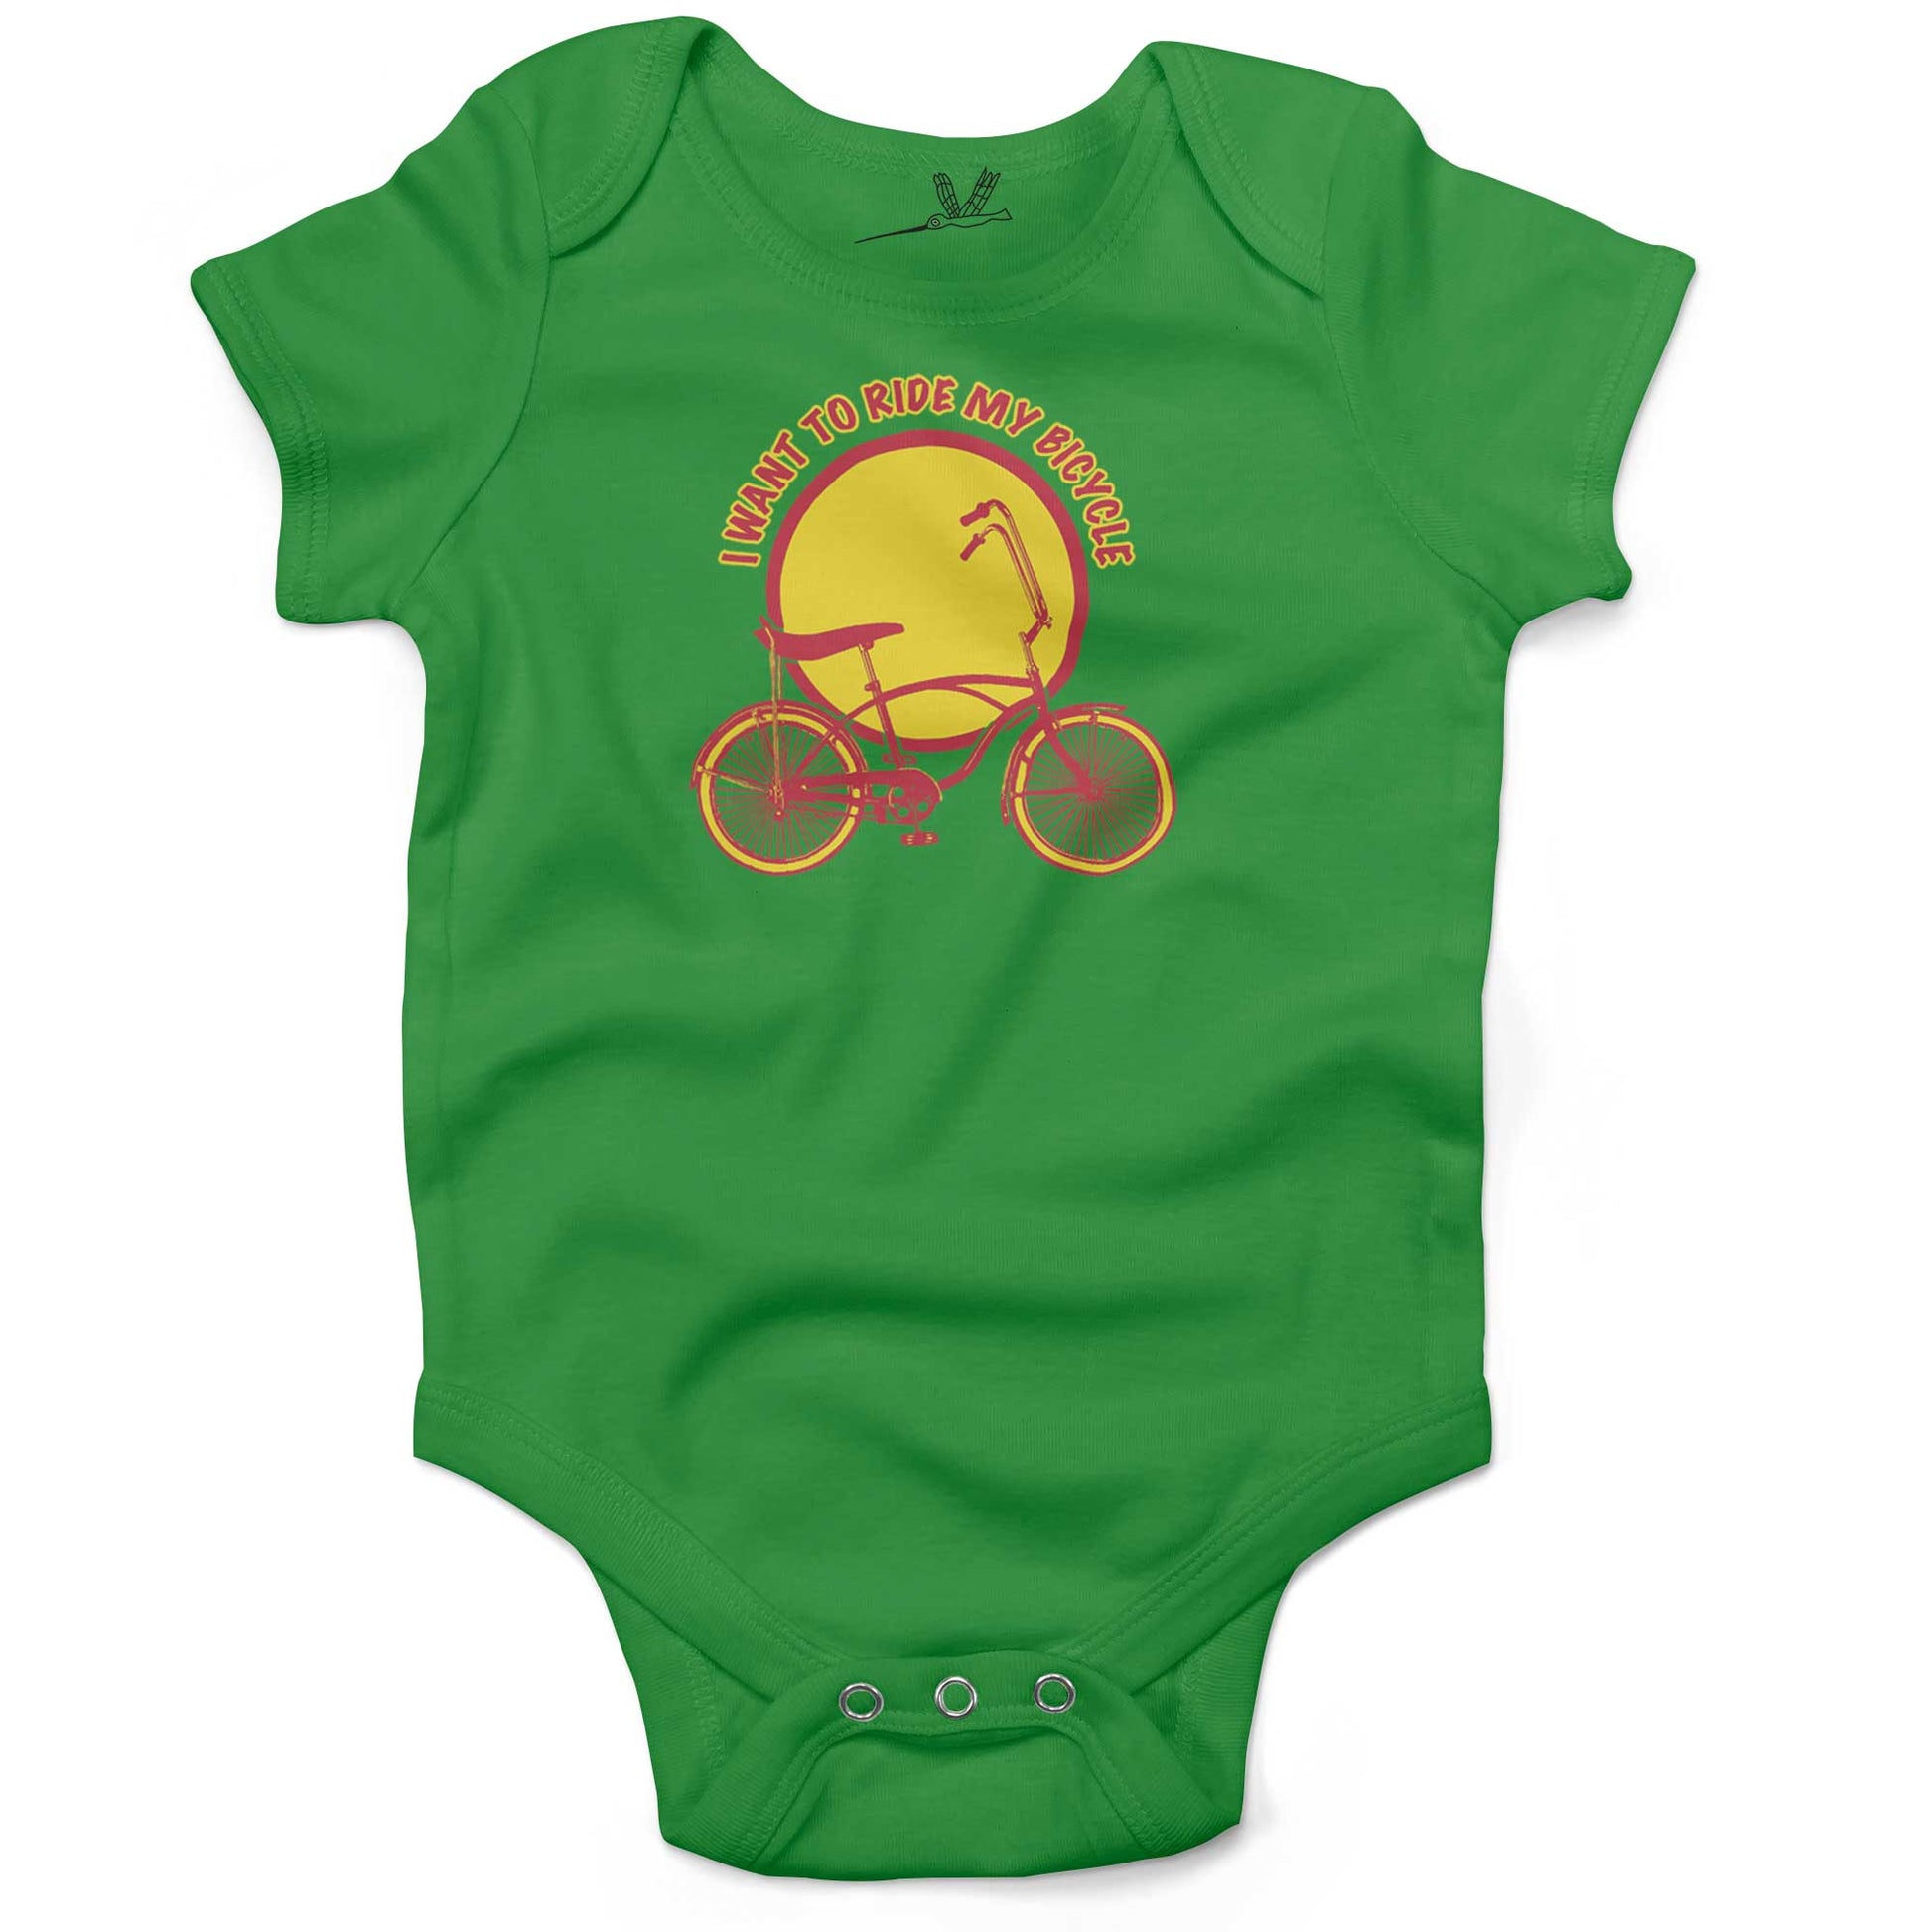 I Want To Ride My Bicycle Infant Bodysuit or Raglan Baby Tee-Grass Green-3-6 months